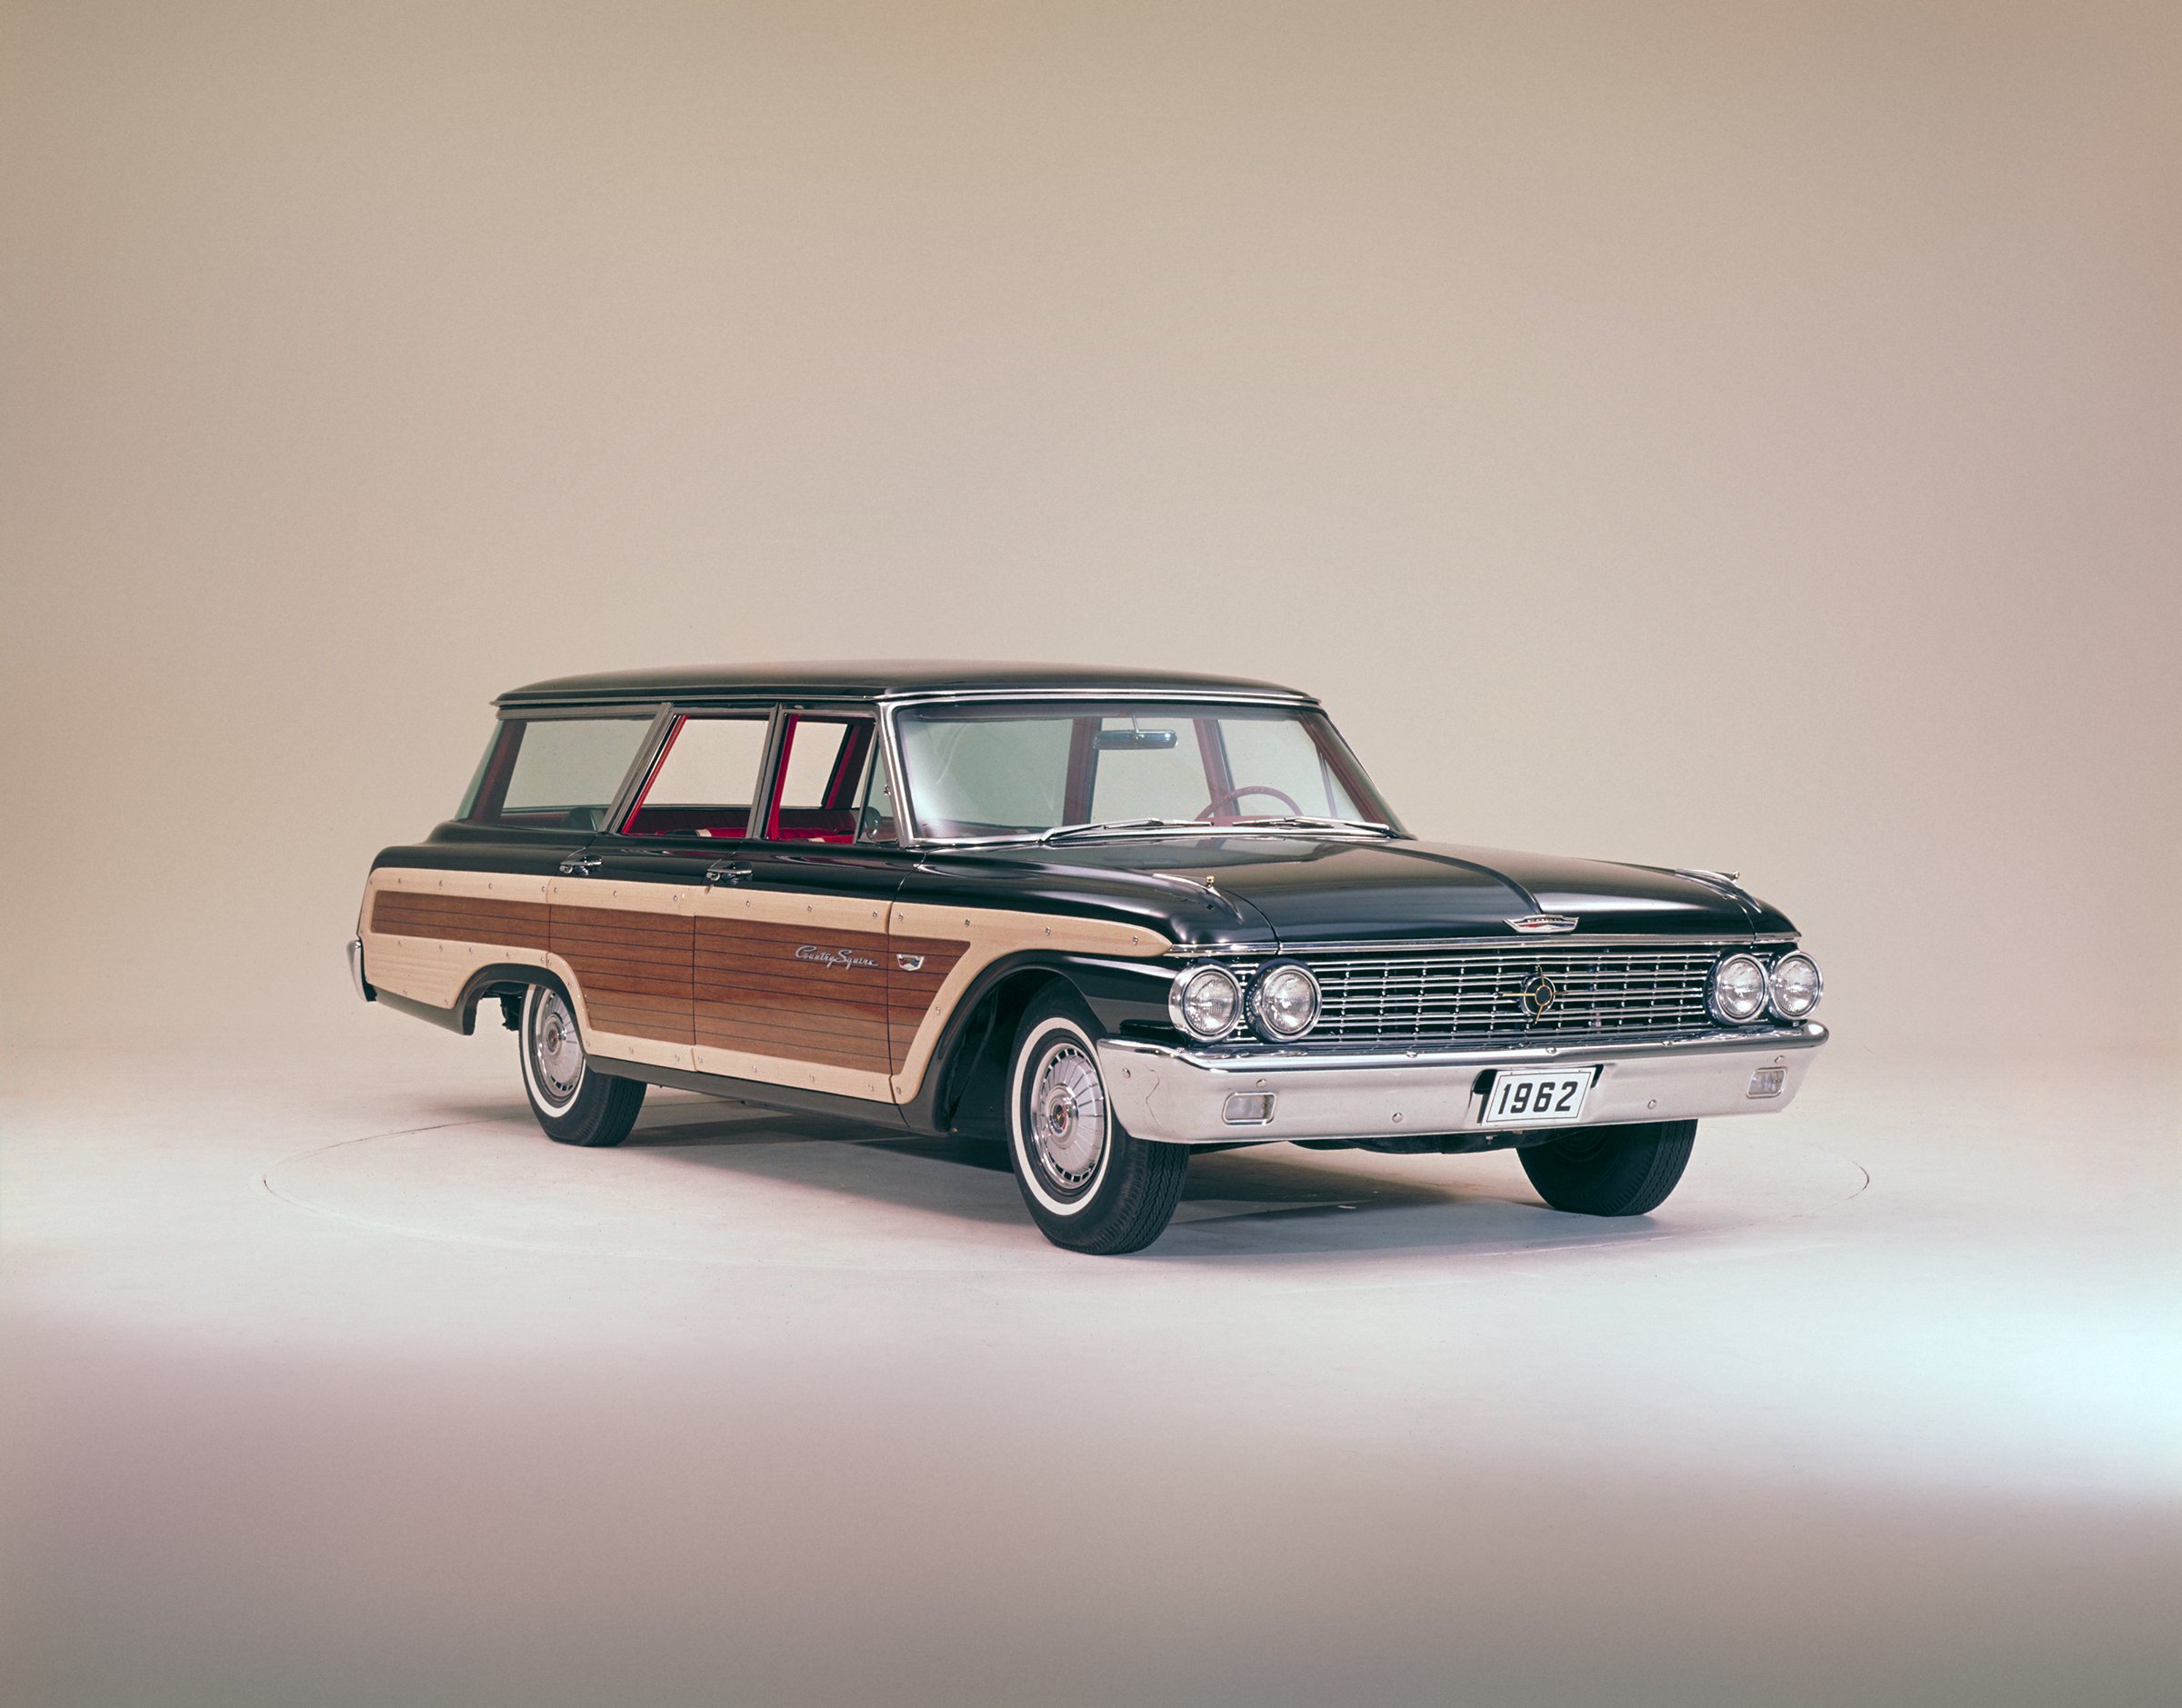 1962, Ford, Country, Squire, 9 passenger, Stationwagon, 71e, Classic Wallpaper